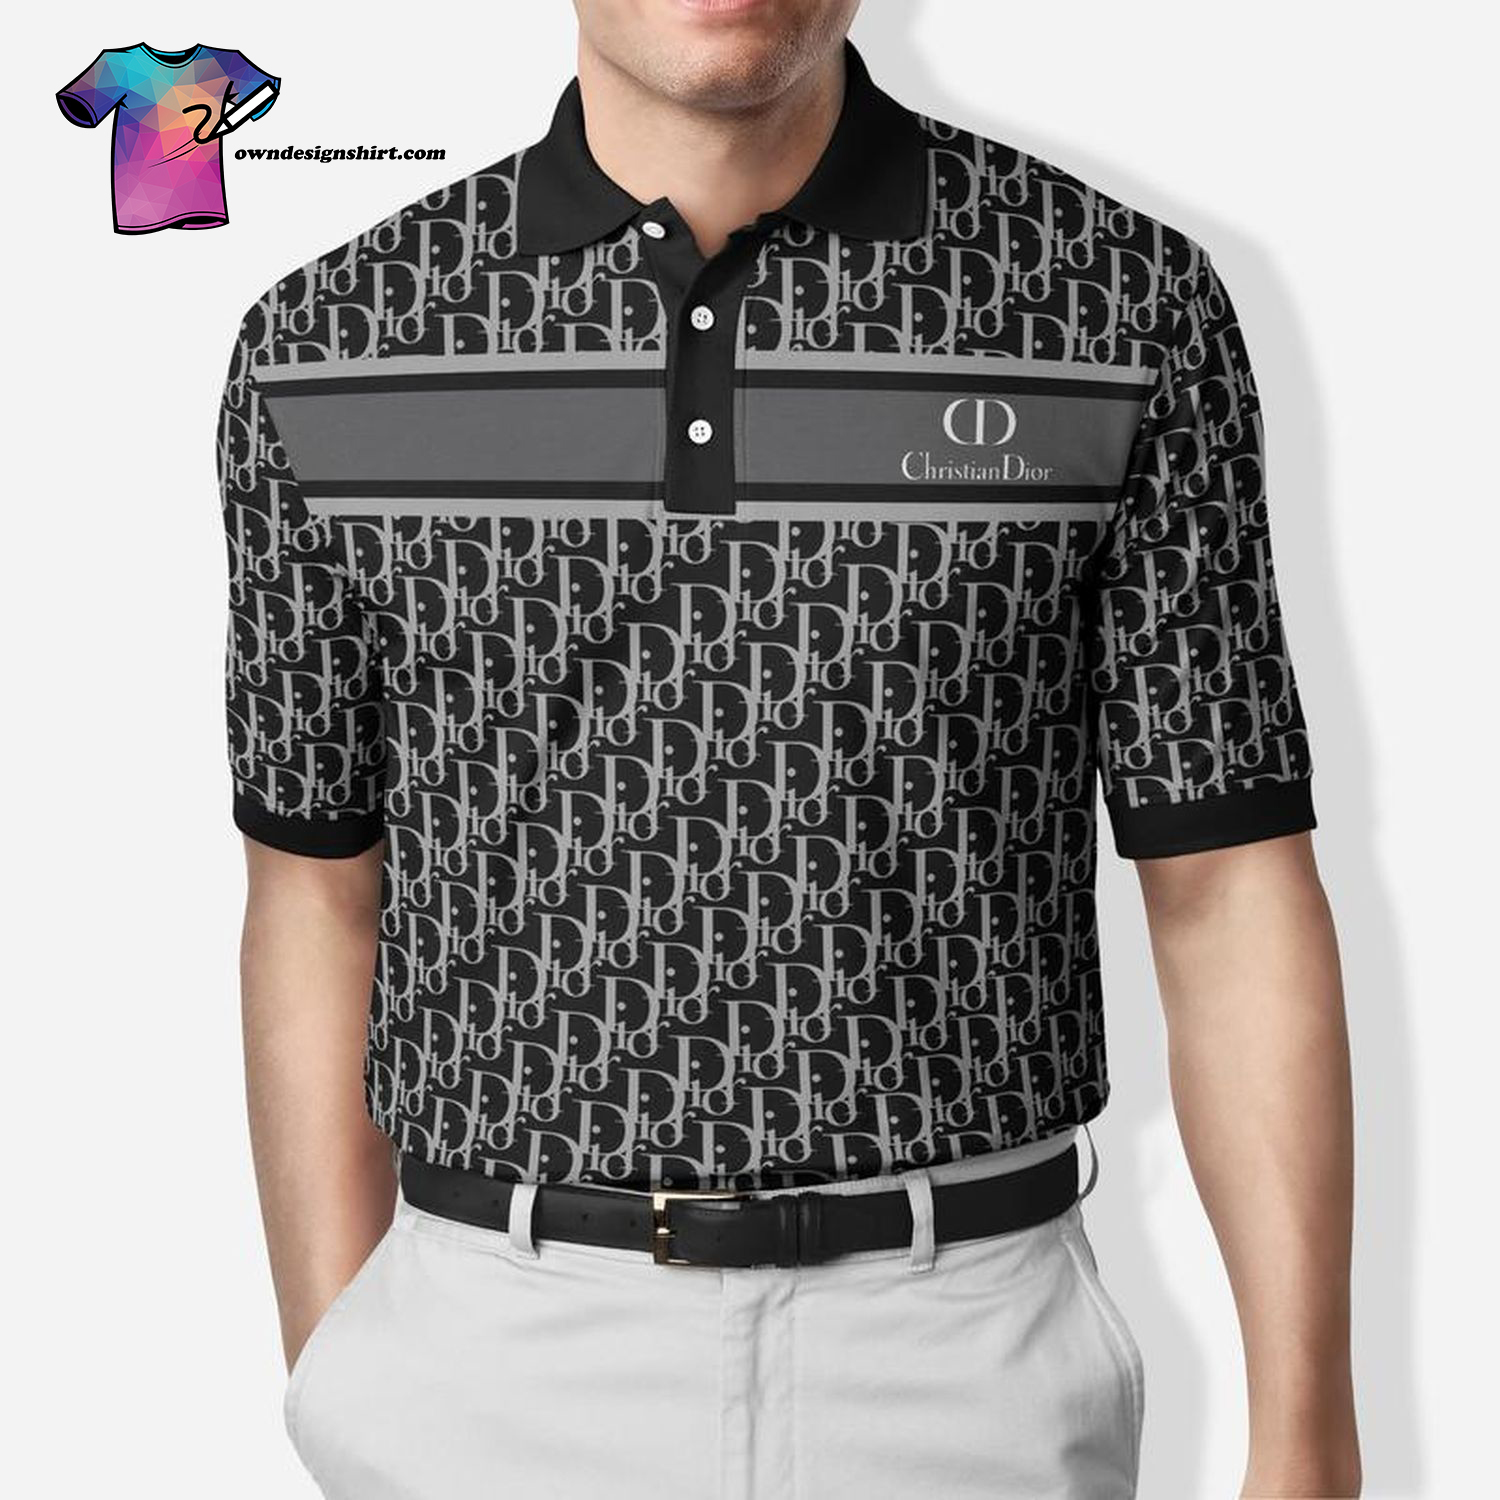 Top-selling Item] Dior Hot Version Polo Shirt